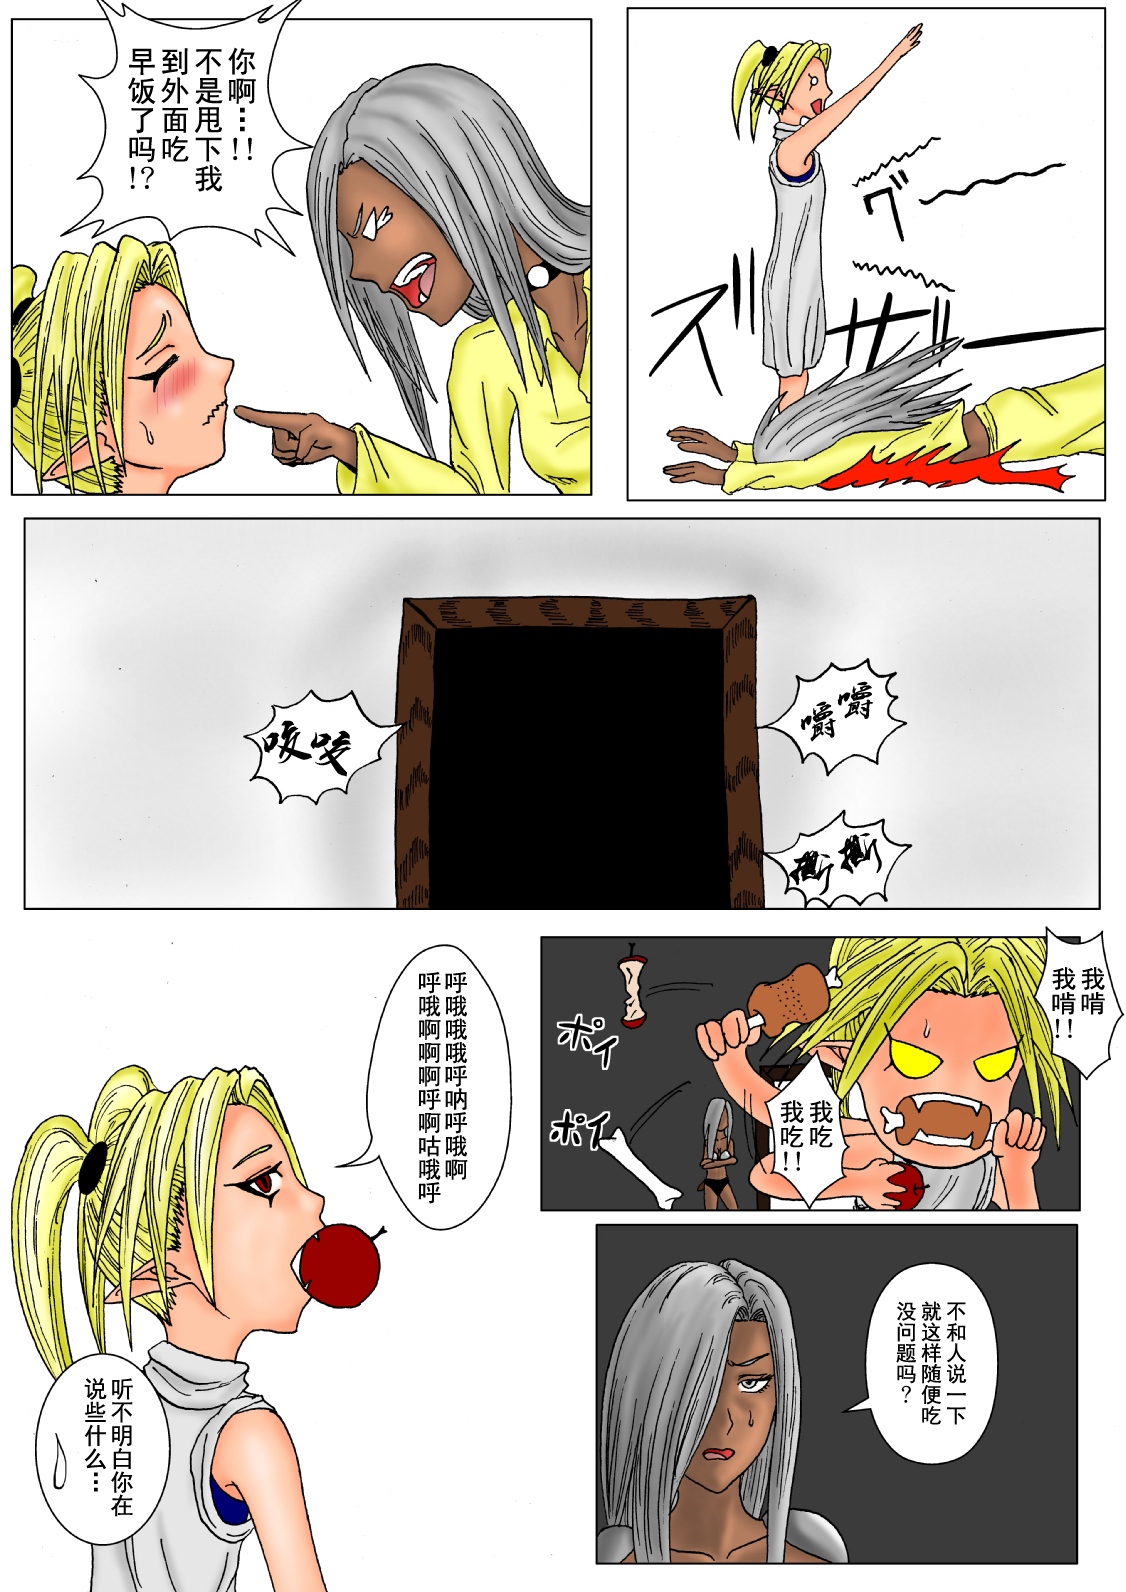 [Tick (Tickzou)] The Tales of Tickling Vol. 3 [Chinese] [狂笑汉化组] [Digital] page 6 full